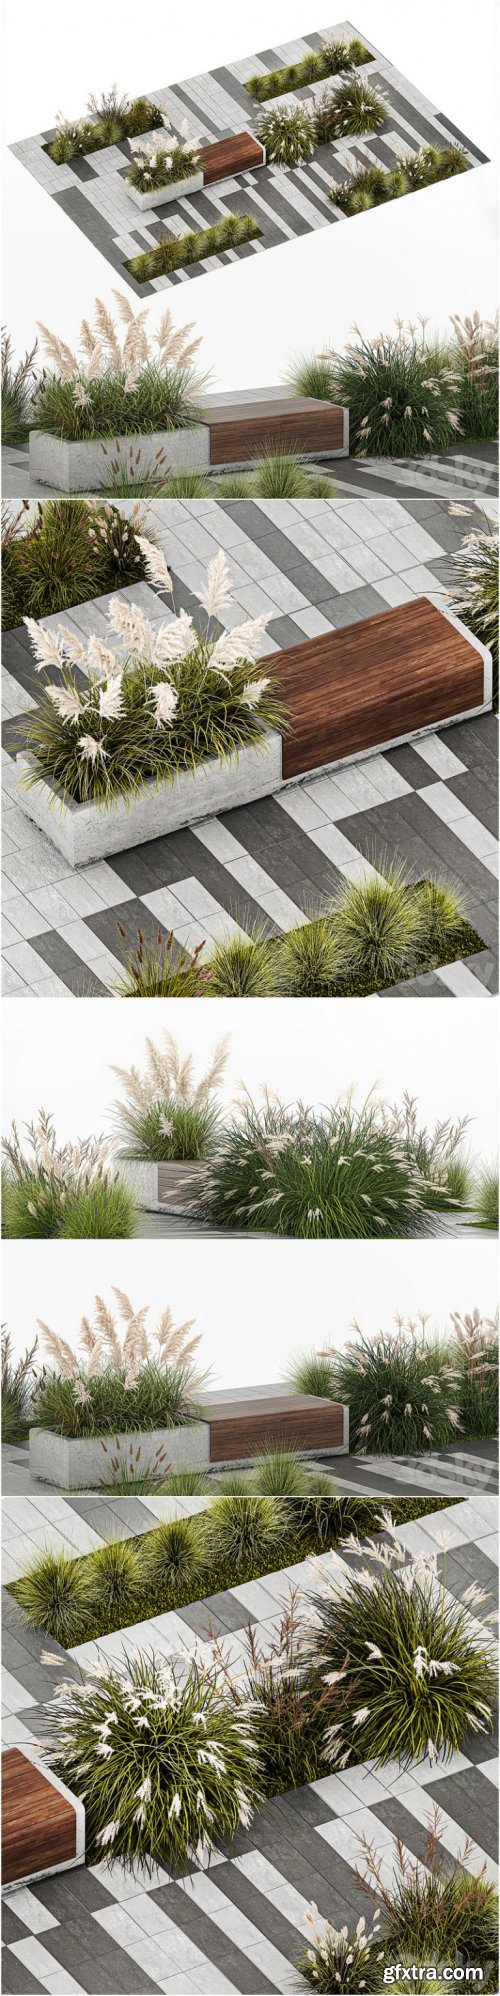 Flower bed with feather grass bushes, Miscanthus, Cortaderia and white pampas grass, bench and bench paving slabs. 1147